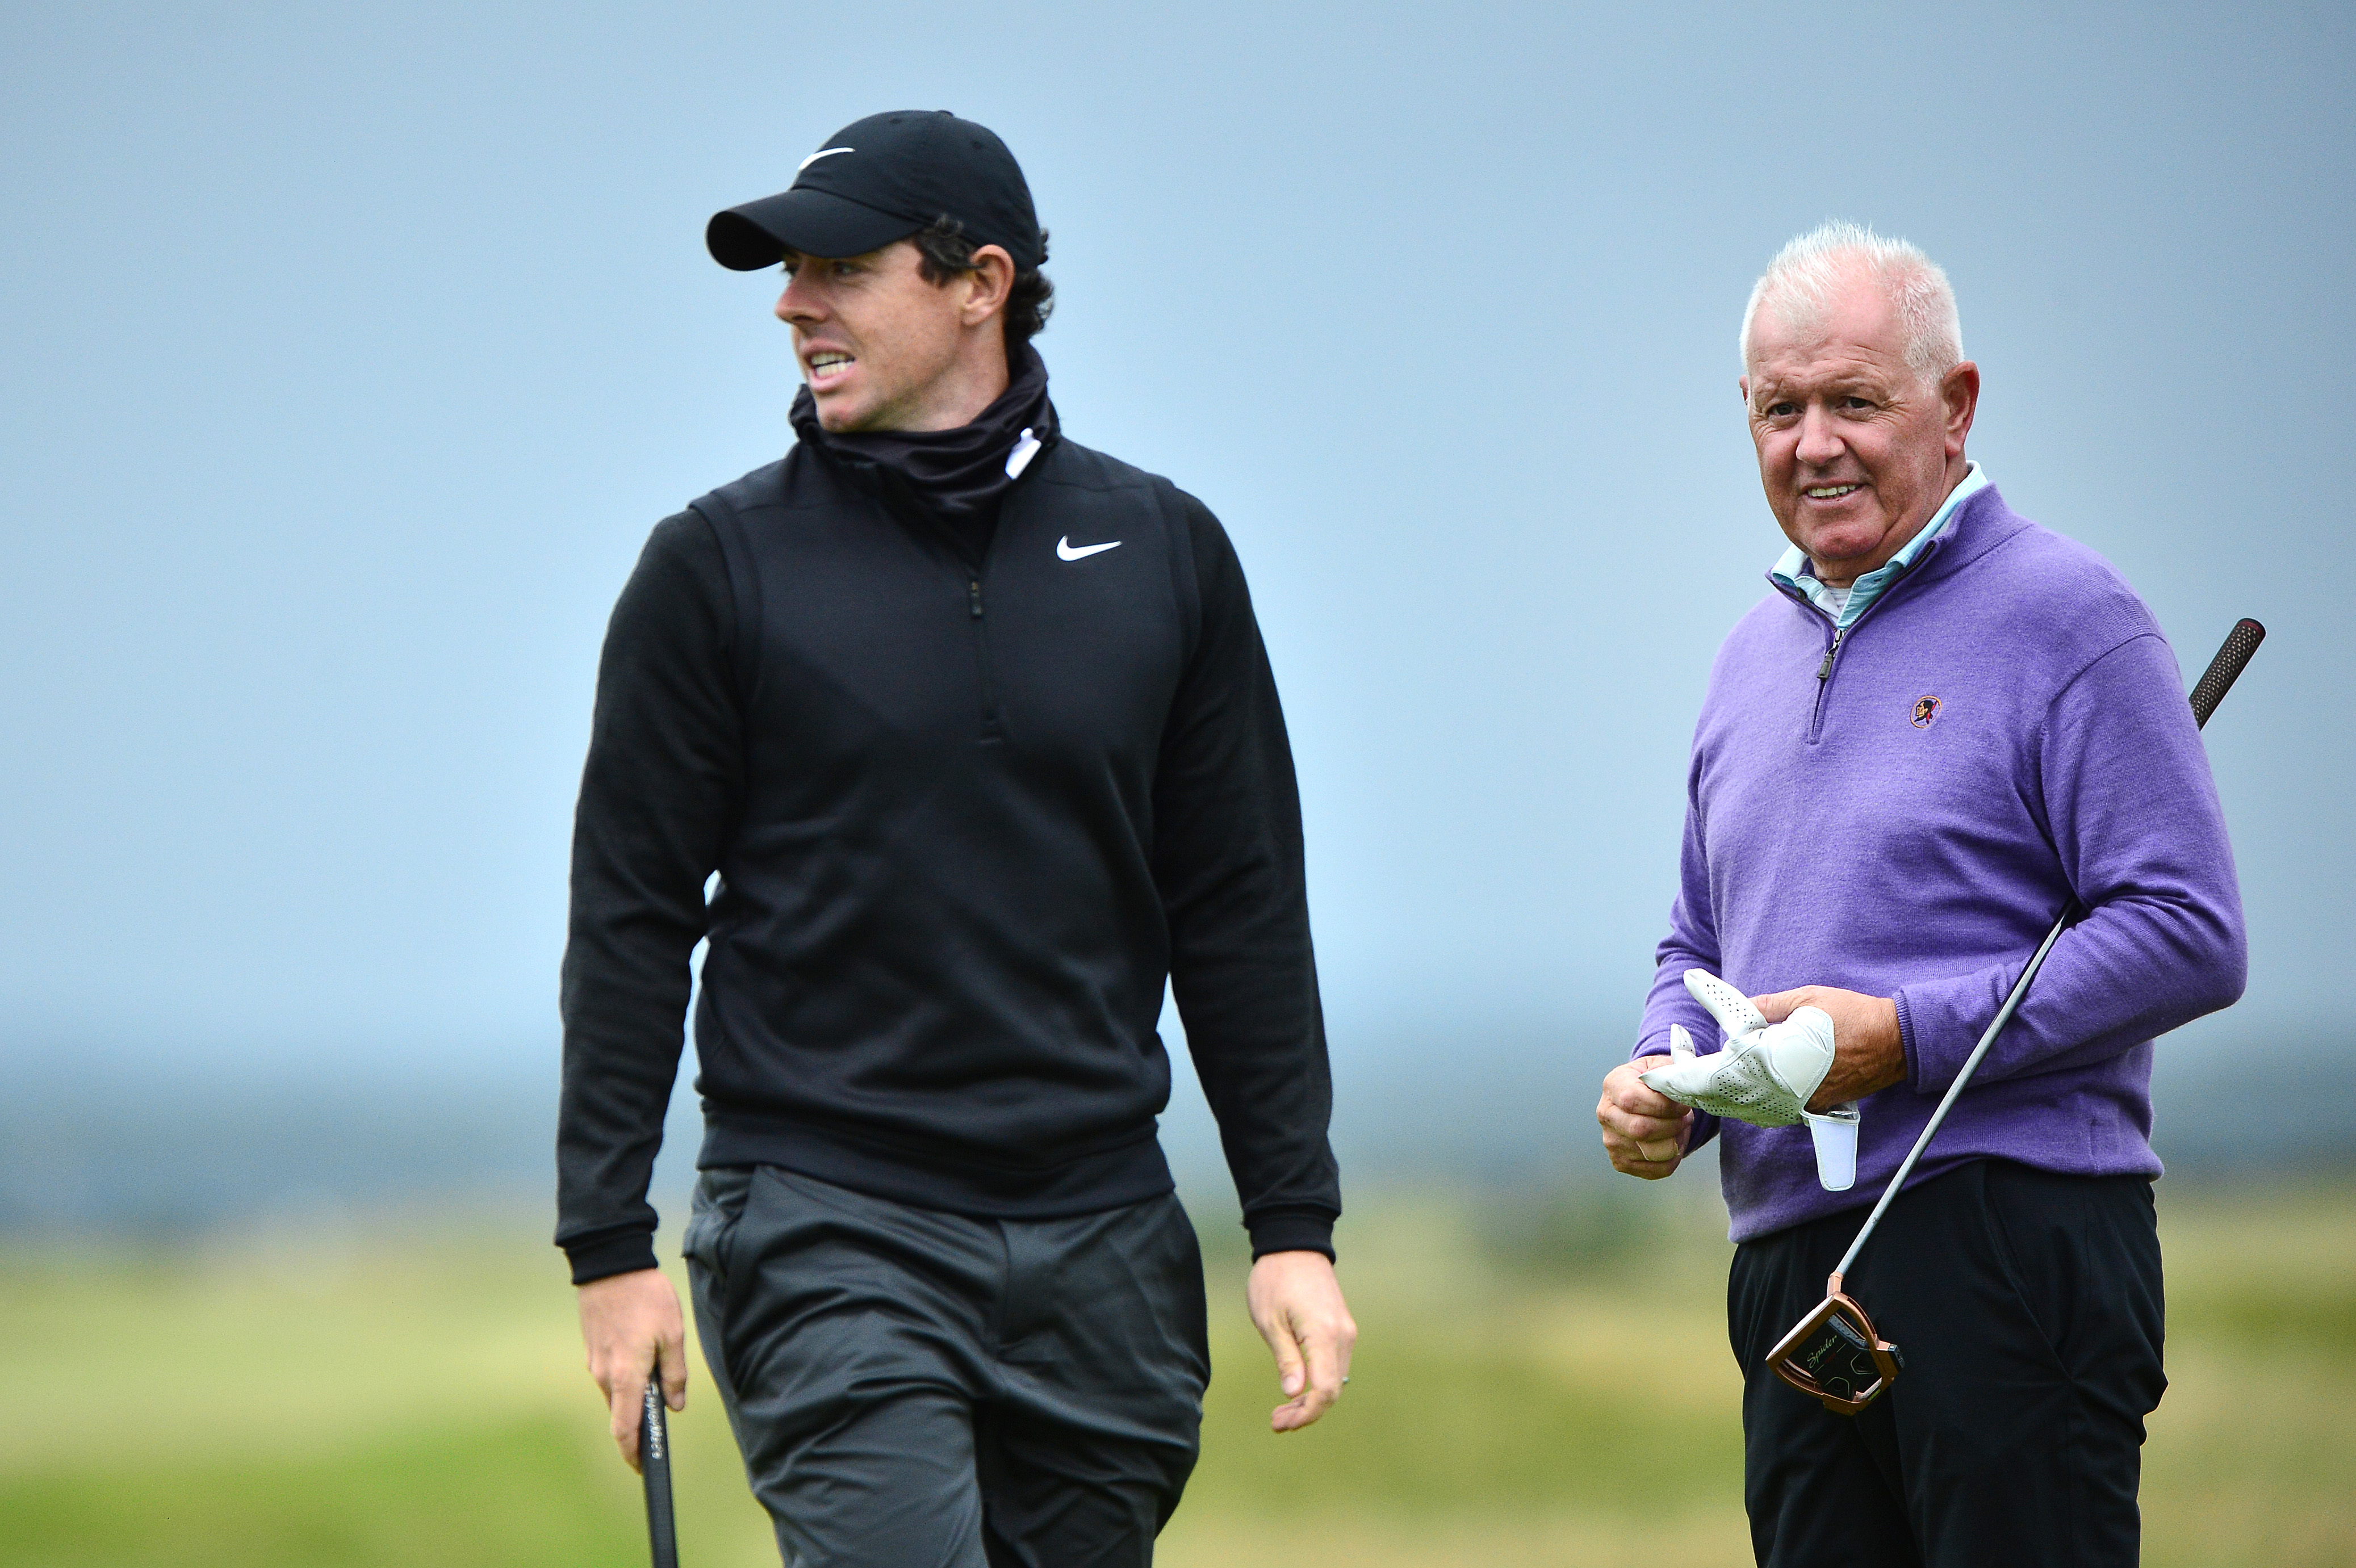 Rory McIlroy and his father, Gerry McIlroy during preview for the Alfred Dunhill Links Championship at The Old Course. (Photo by Mark Runnacles/Getty Images)